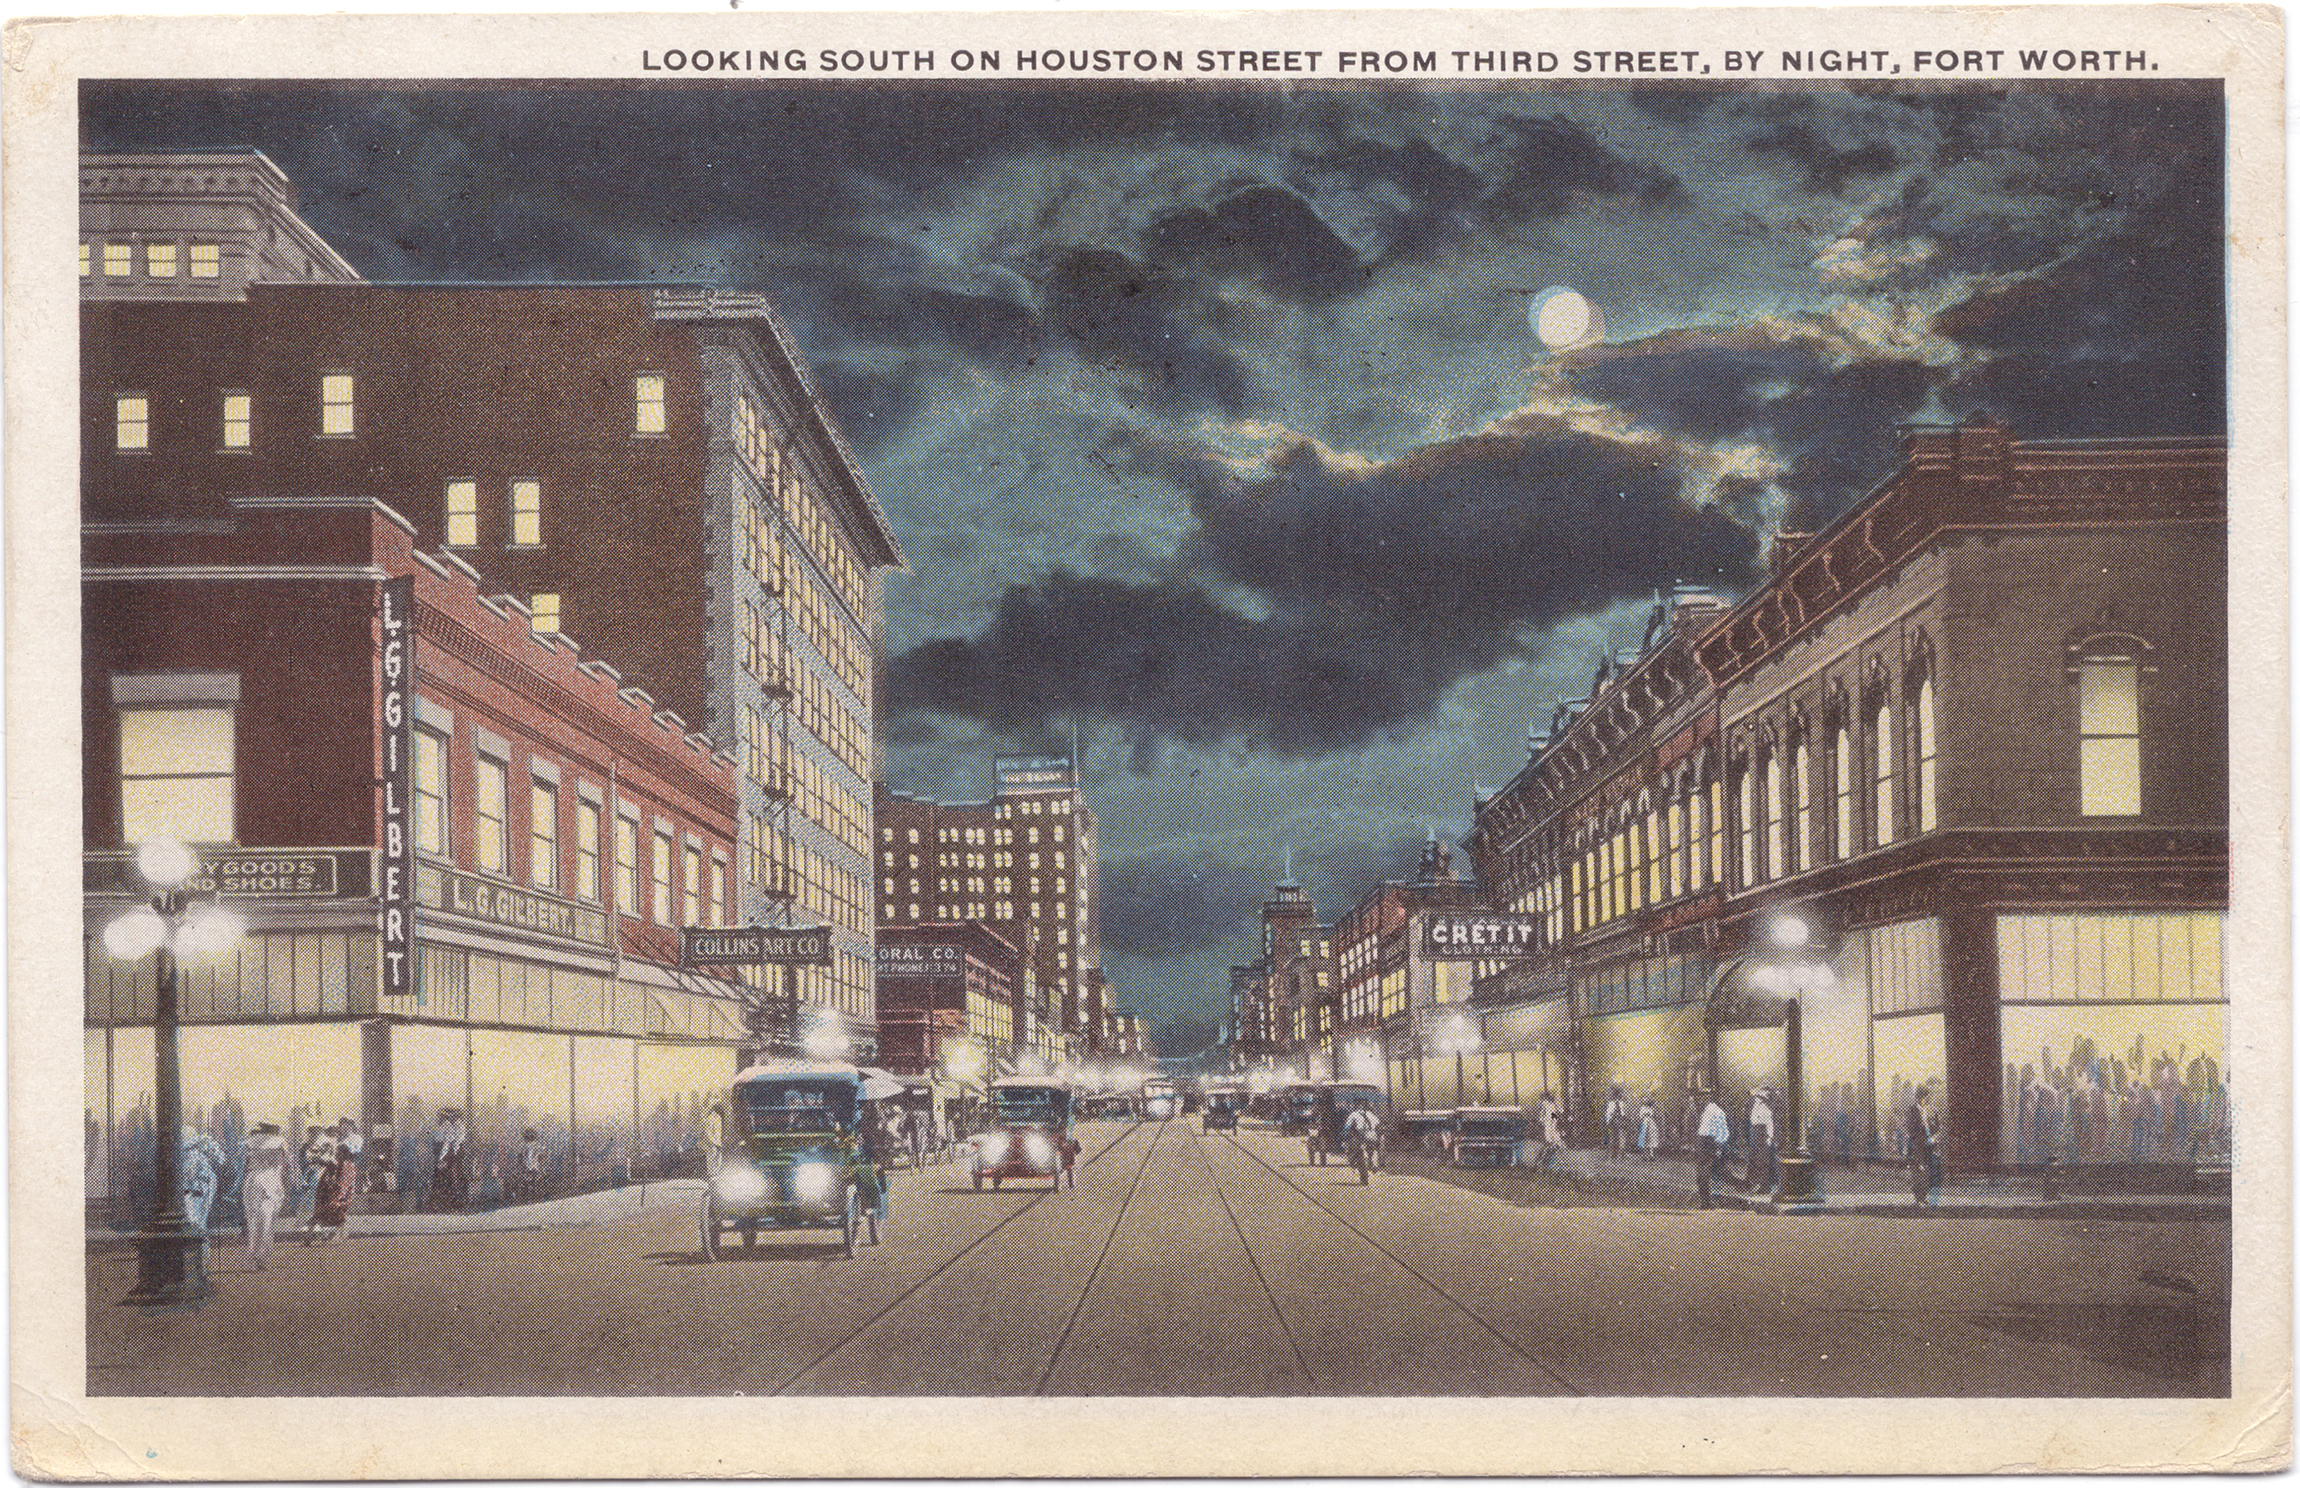 The postcard features a drawing of the street at night with cars in the middle of the street, people walking on the sidewalks, and buildings lining both sides.